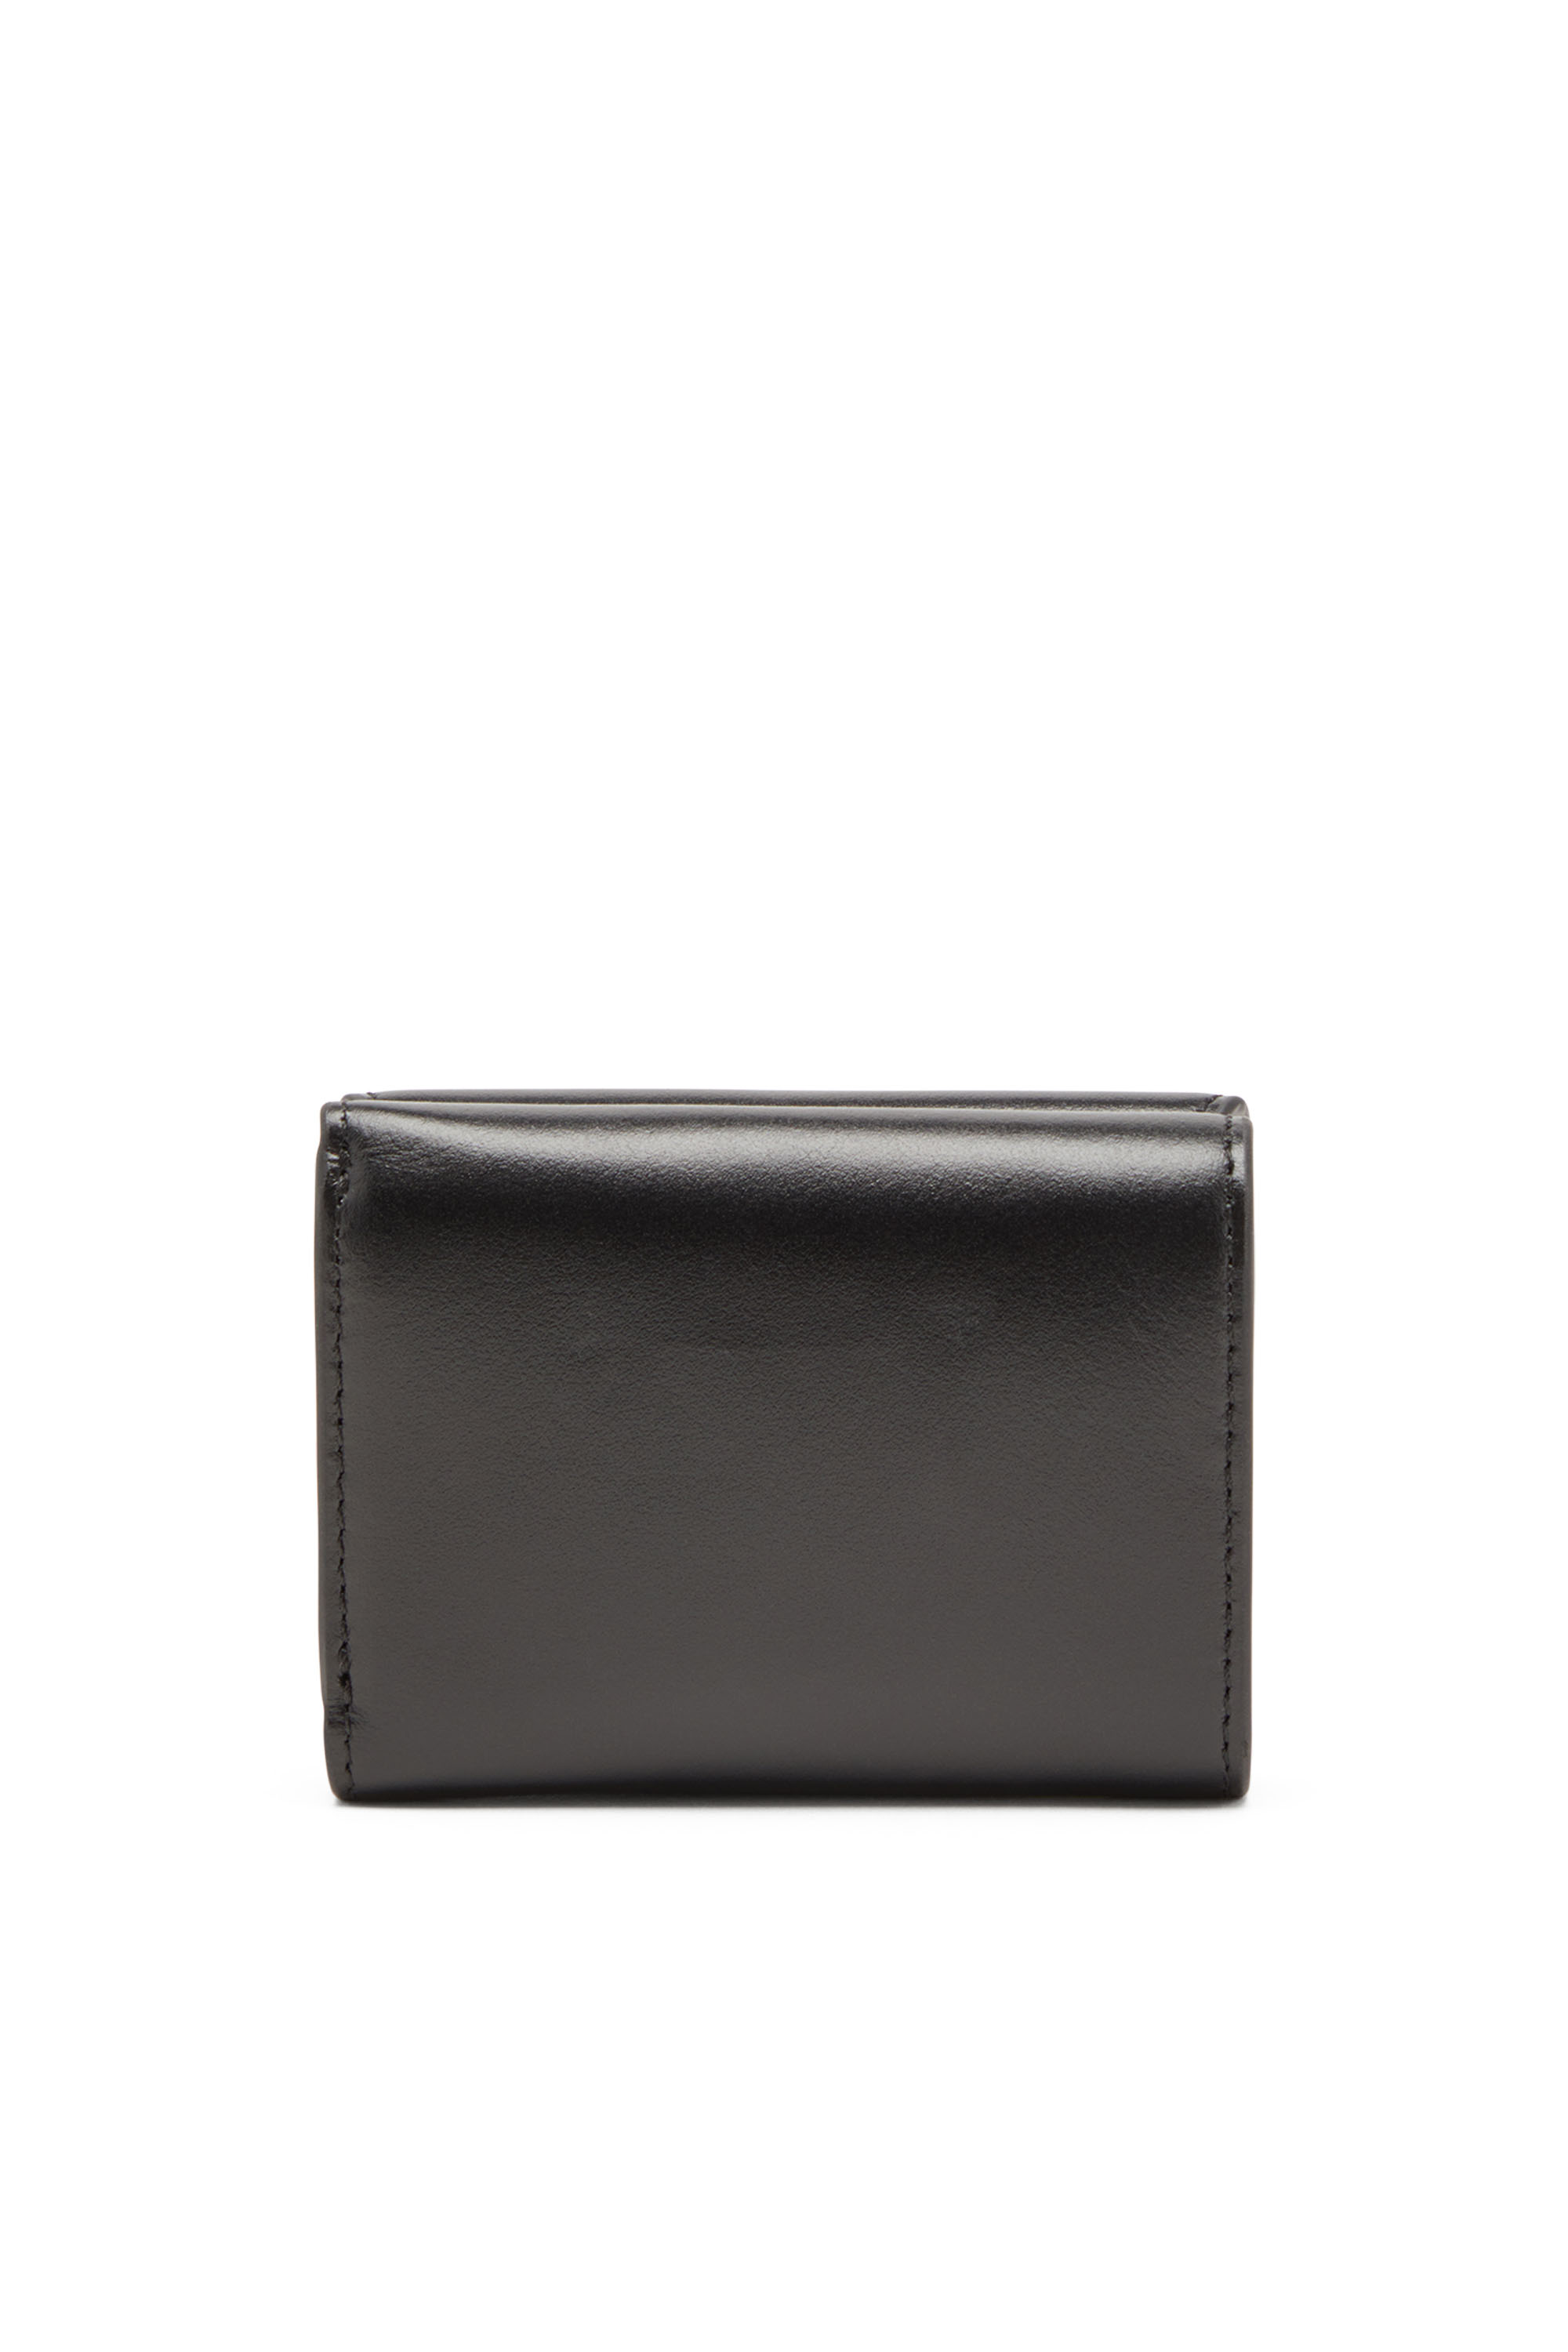 Diesel - 1DR TRI FOLD COIN XS II, Woman Tri-fold wallet in leather in Black - Image 2